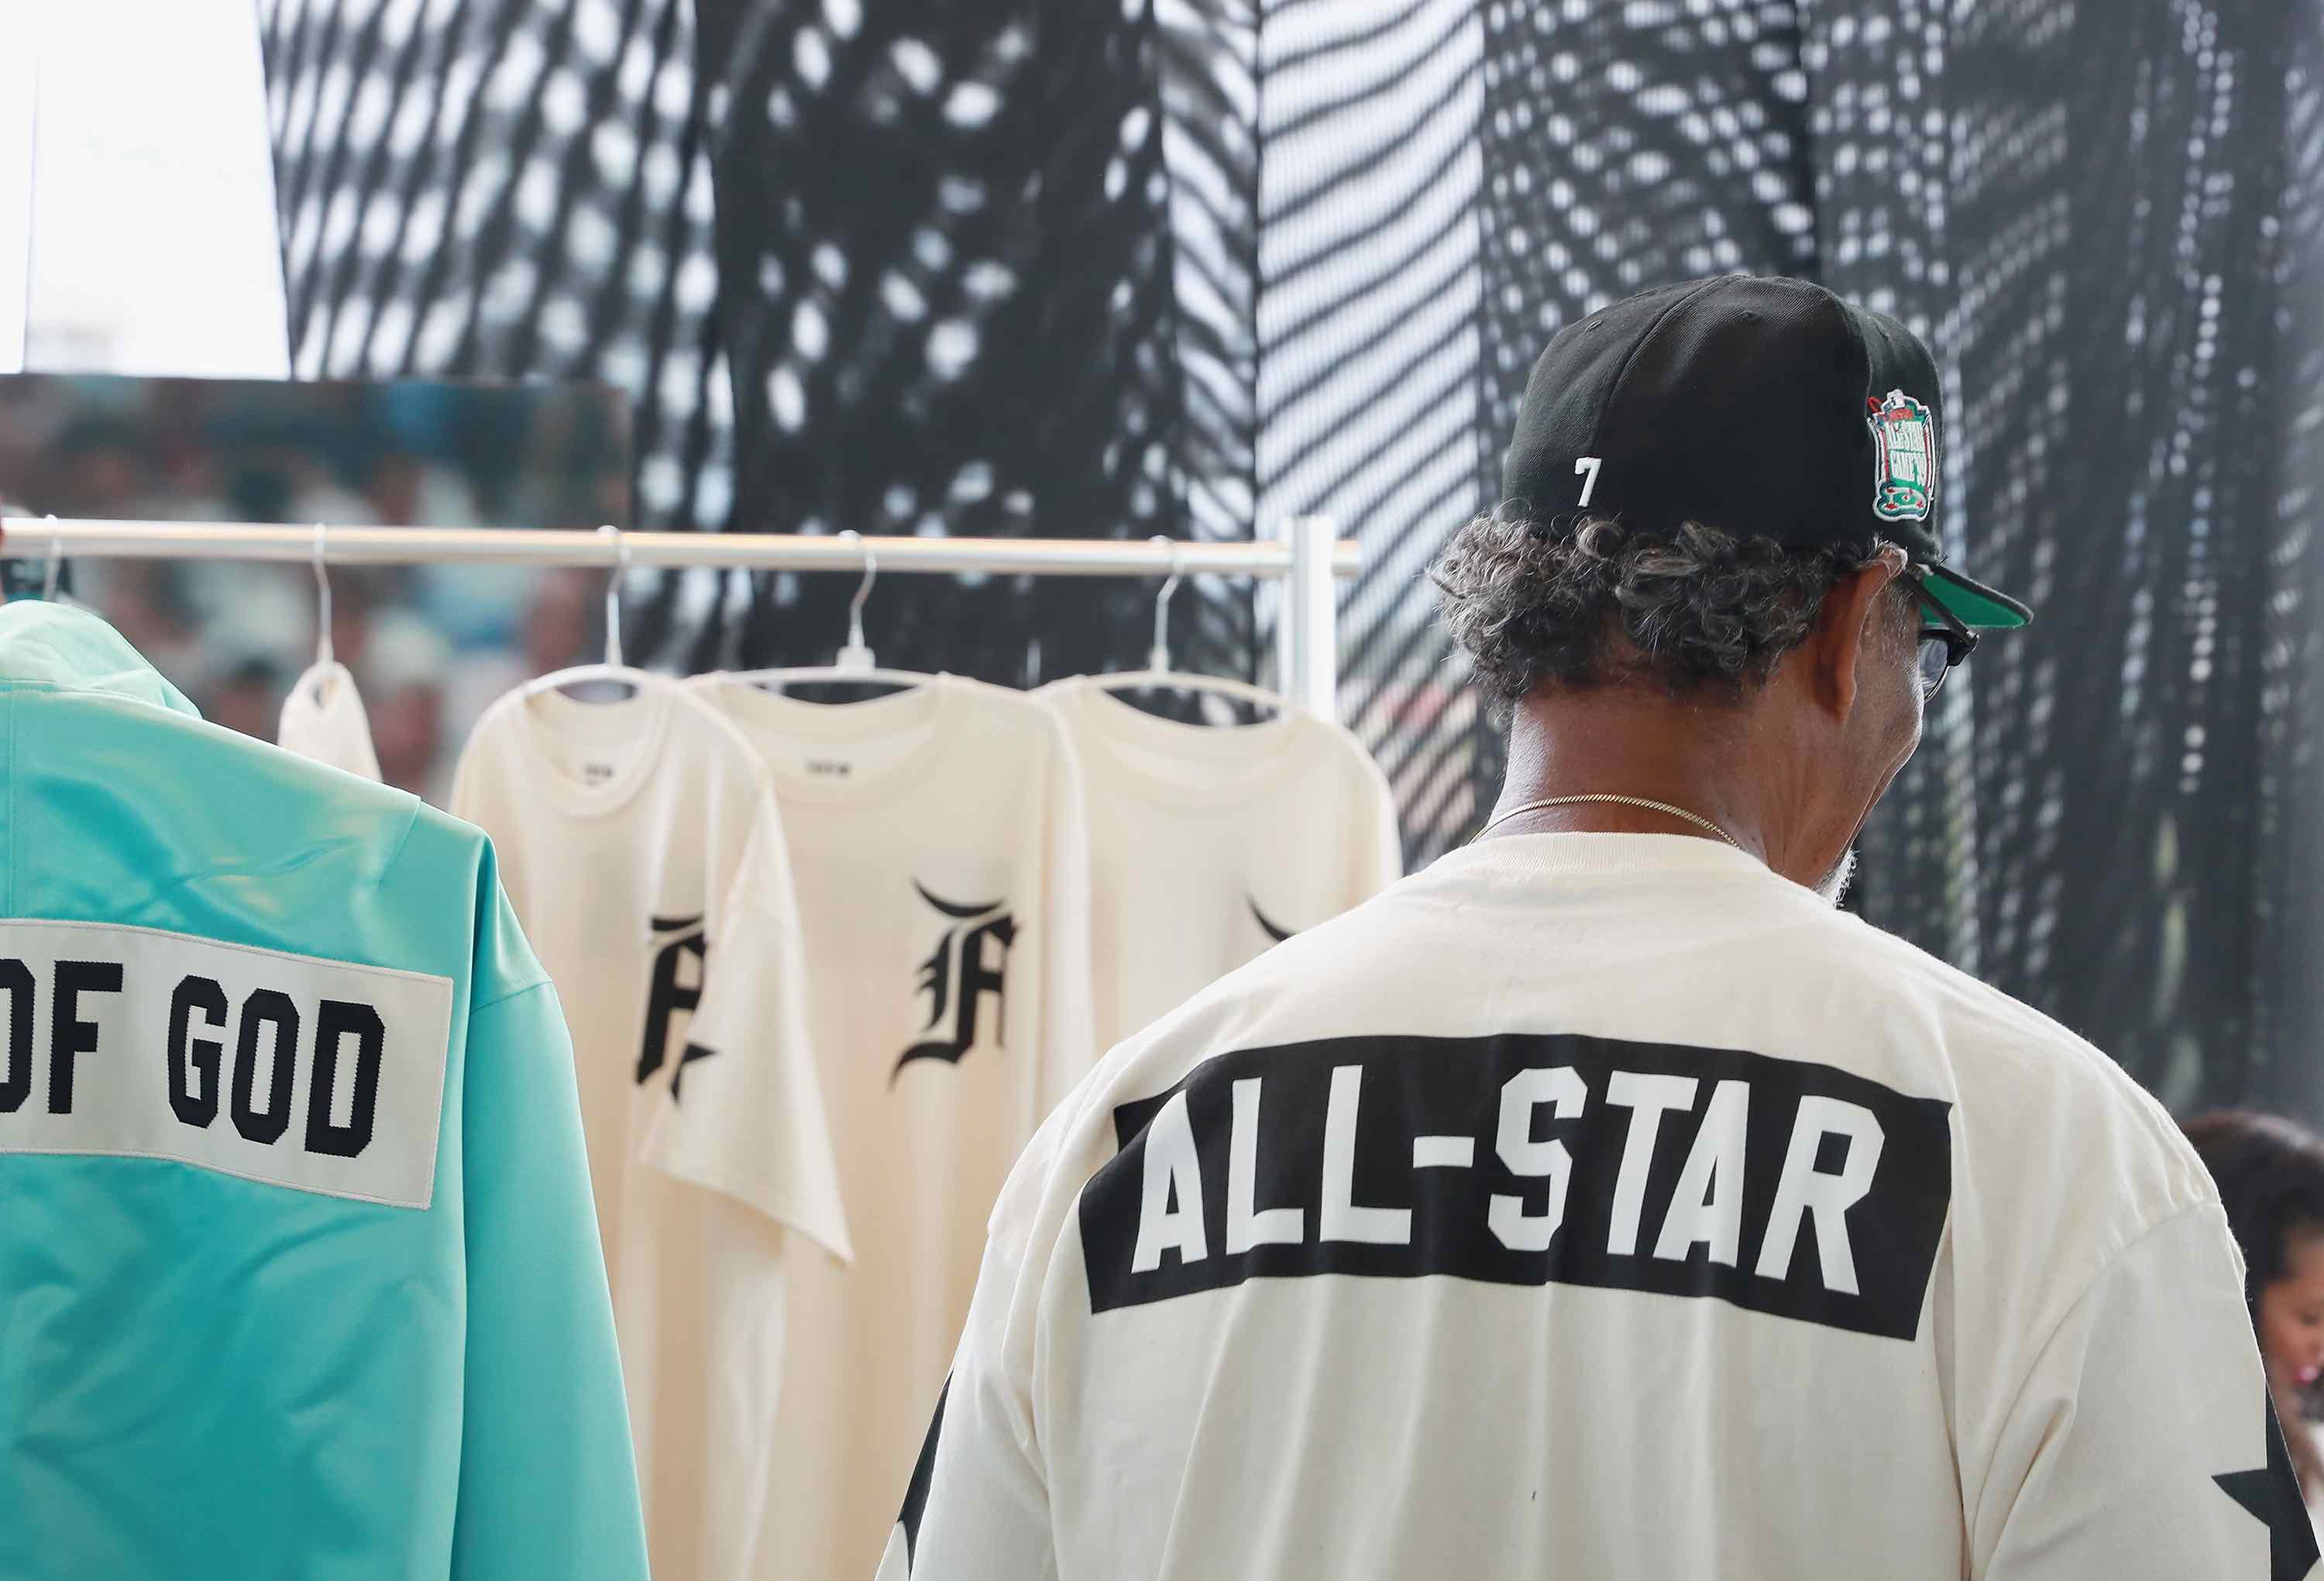 The Fear of God MLB All-Star Collection Pays Tribute to Ken Griffey